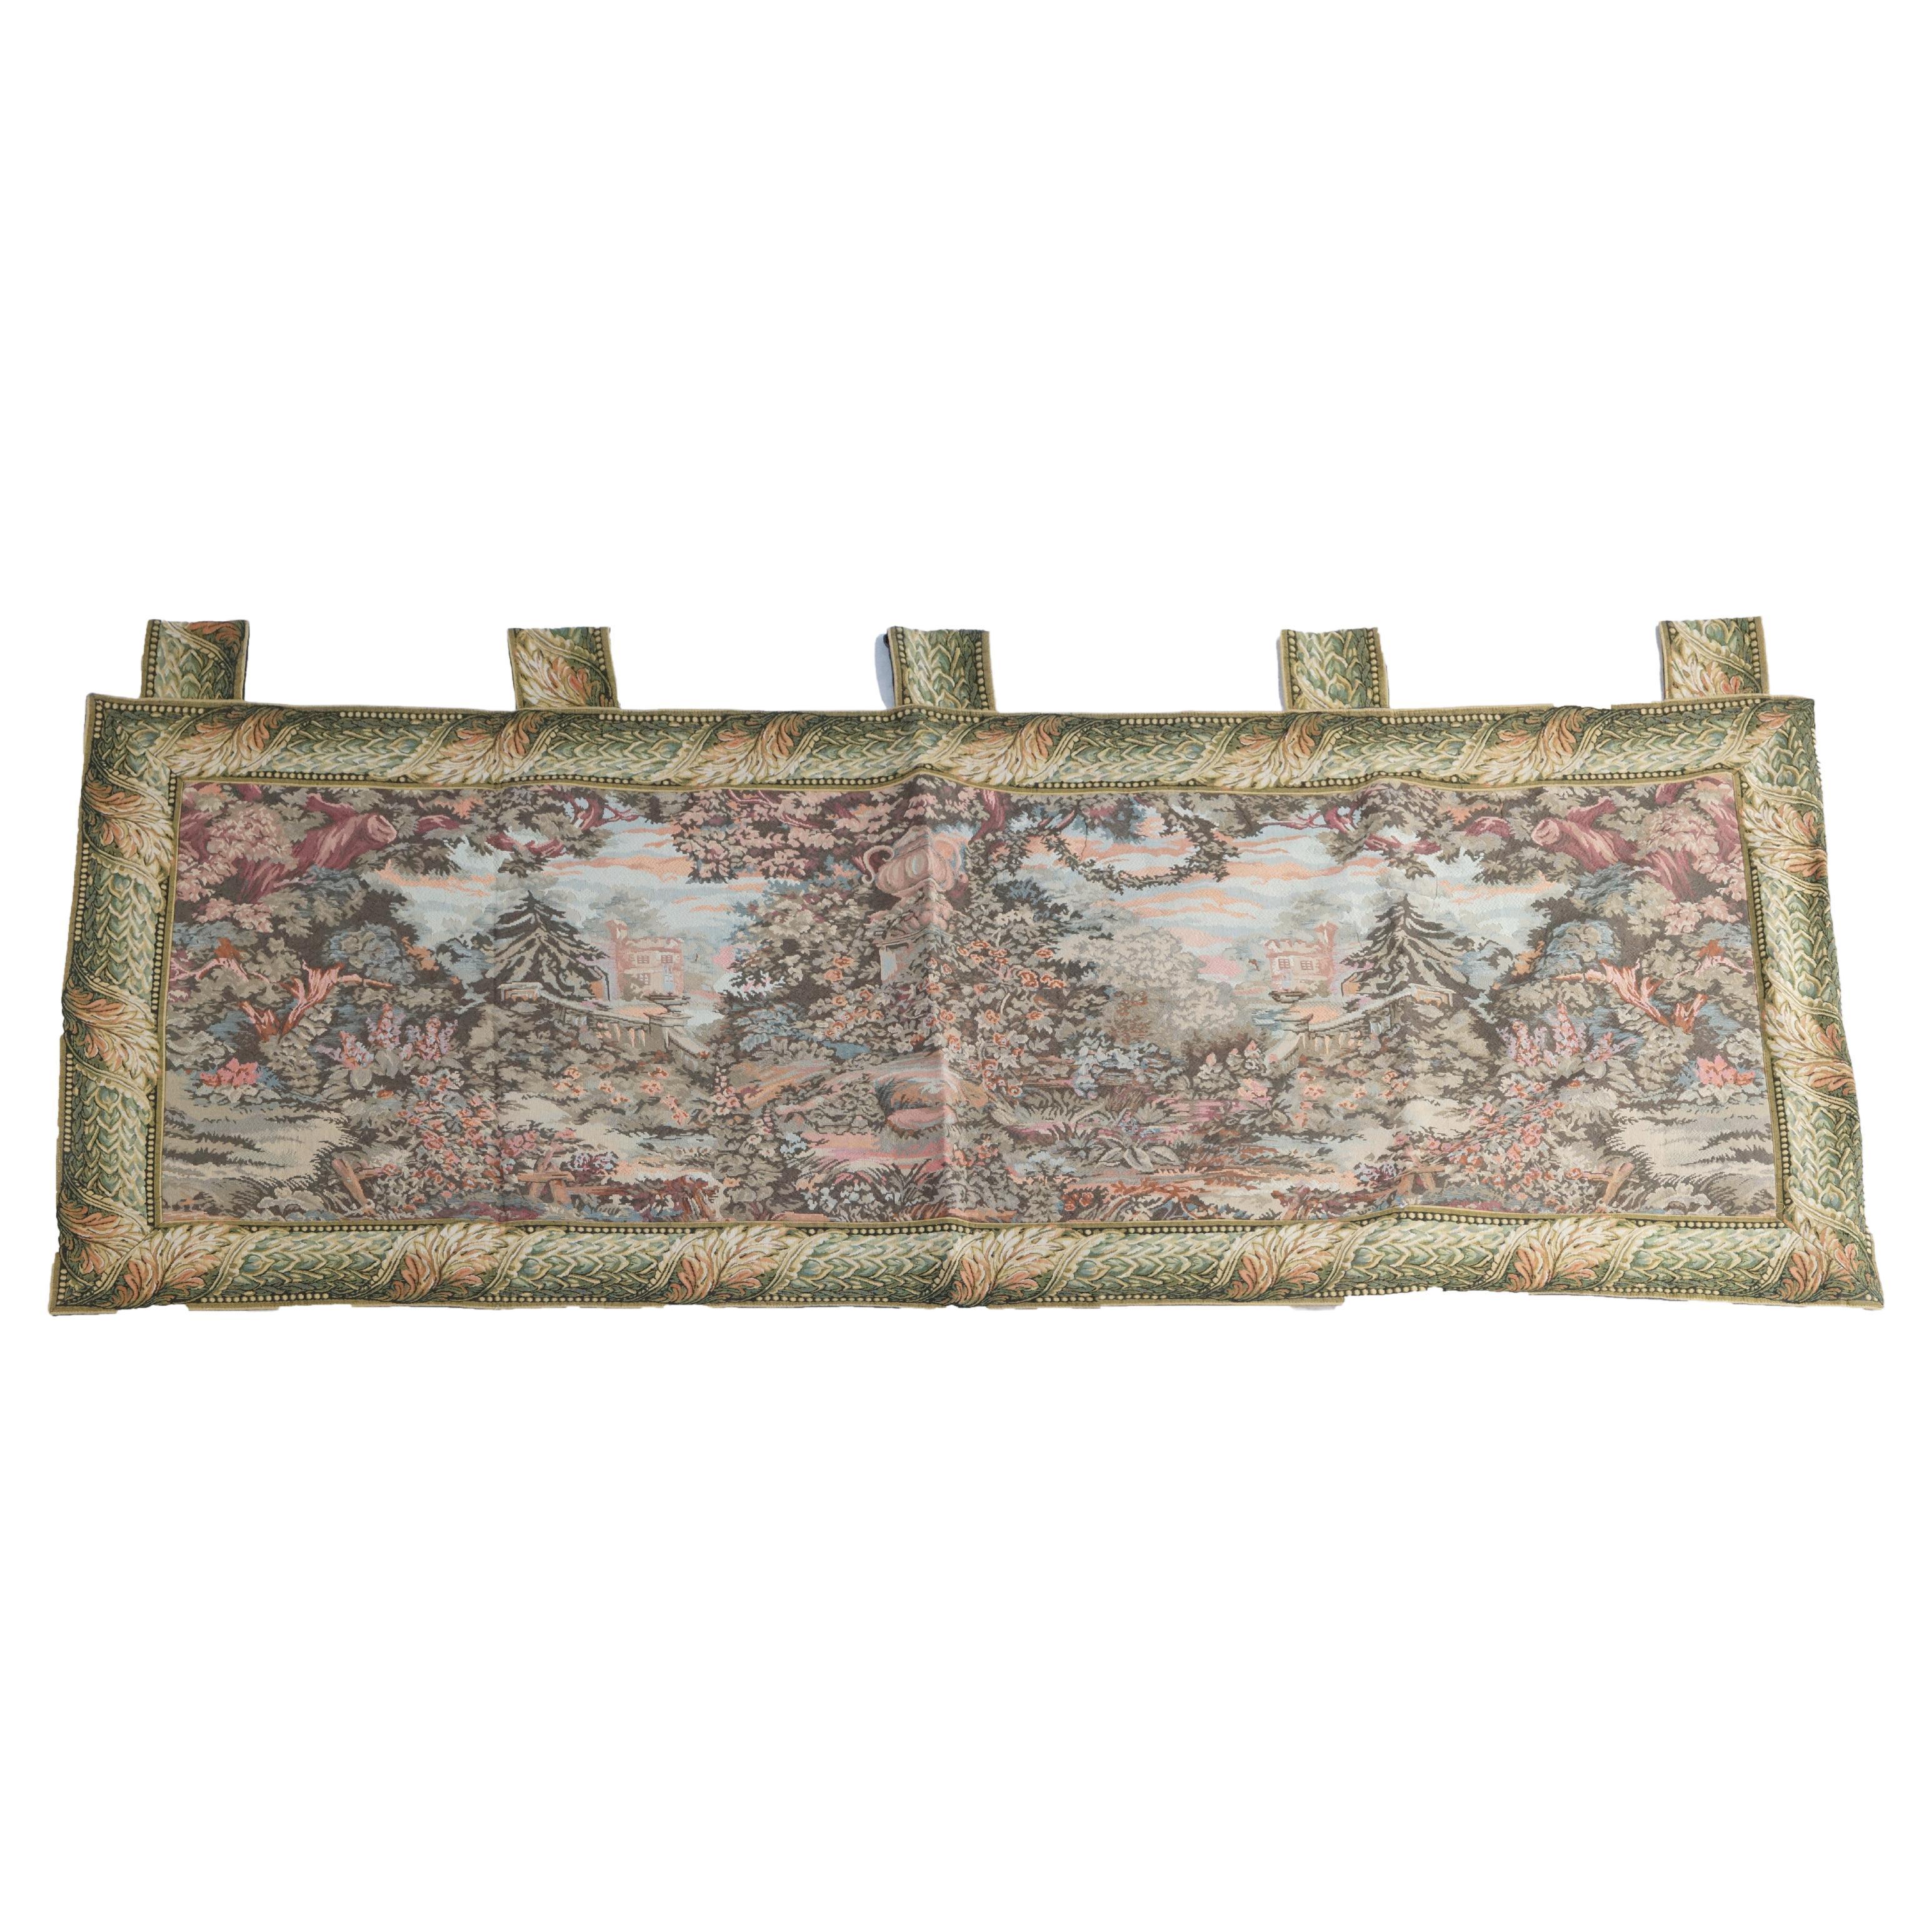 Contemporary Greco-Roman Scenic Courtyard Wall Tapestry with Figures 20th